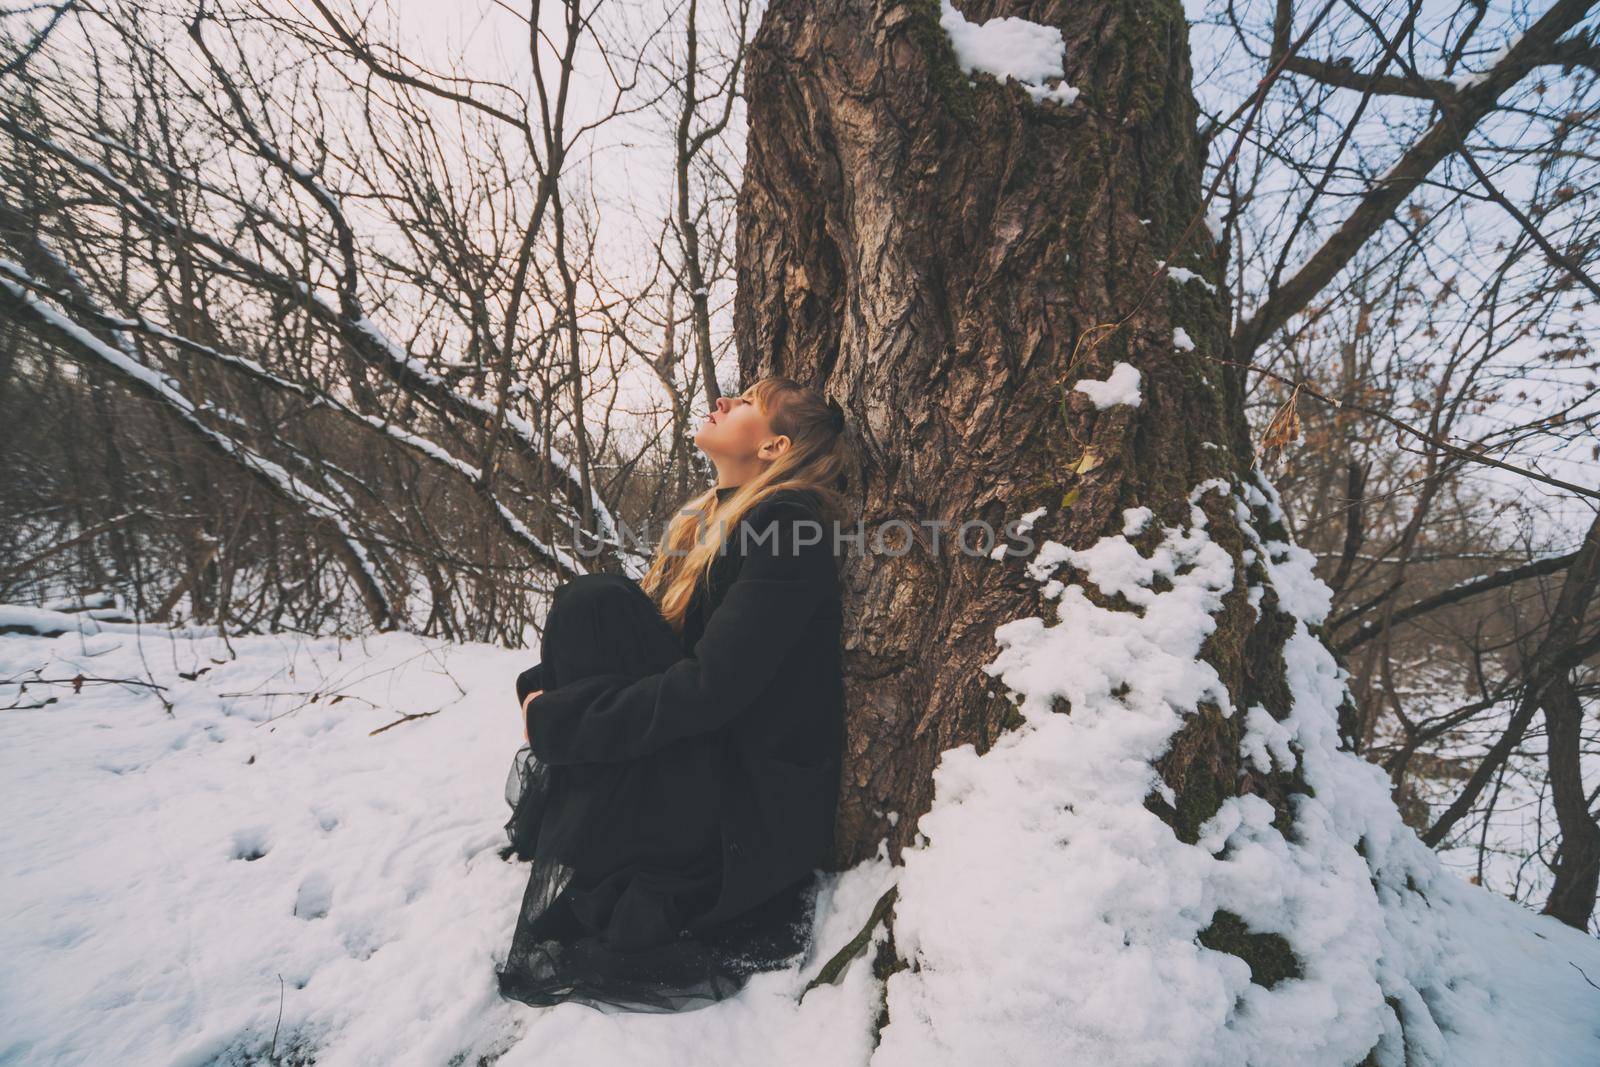 Depressed and lonely woman crying in forest in winter.